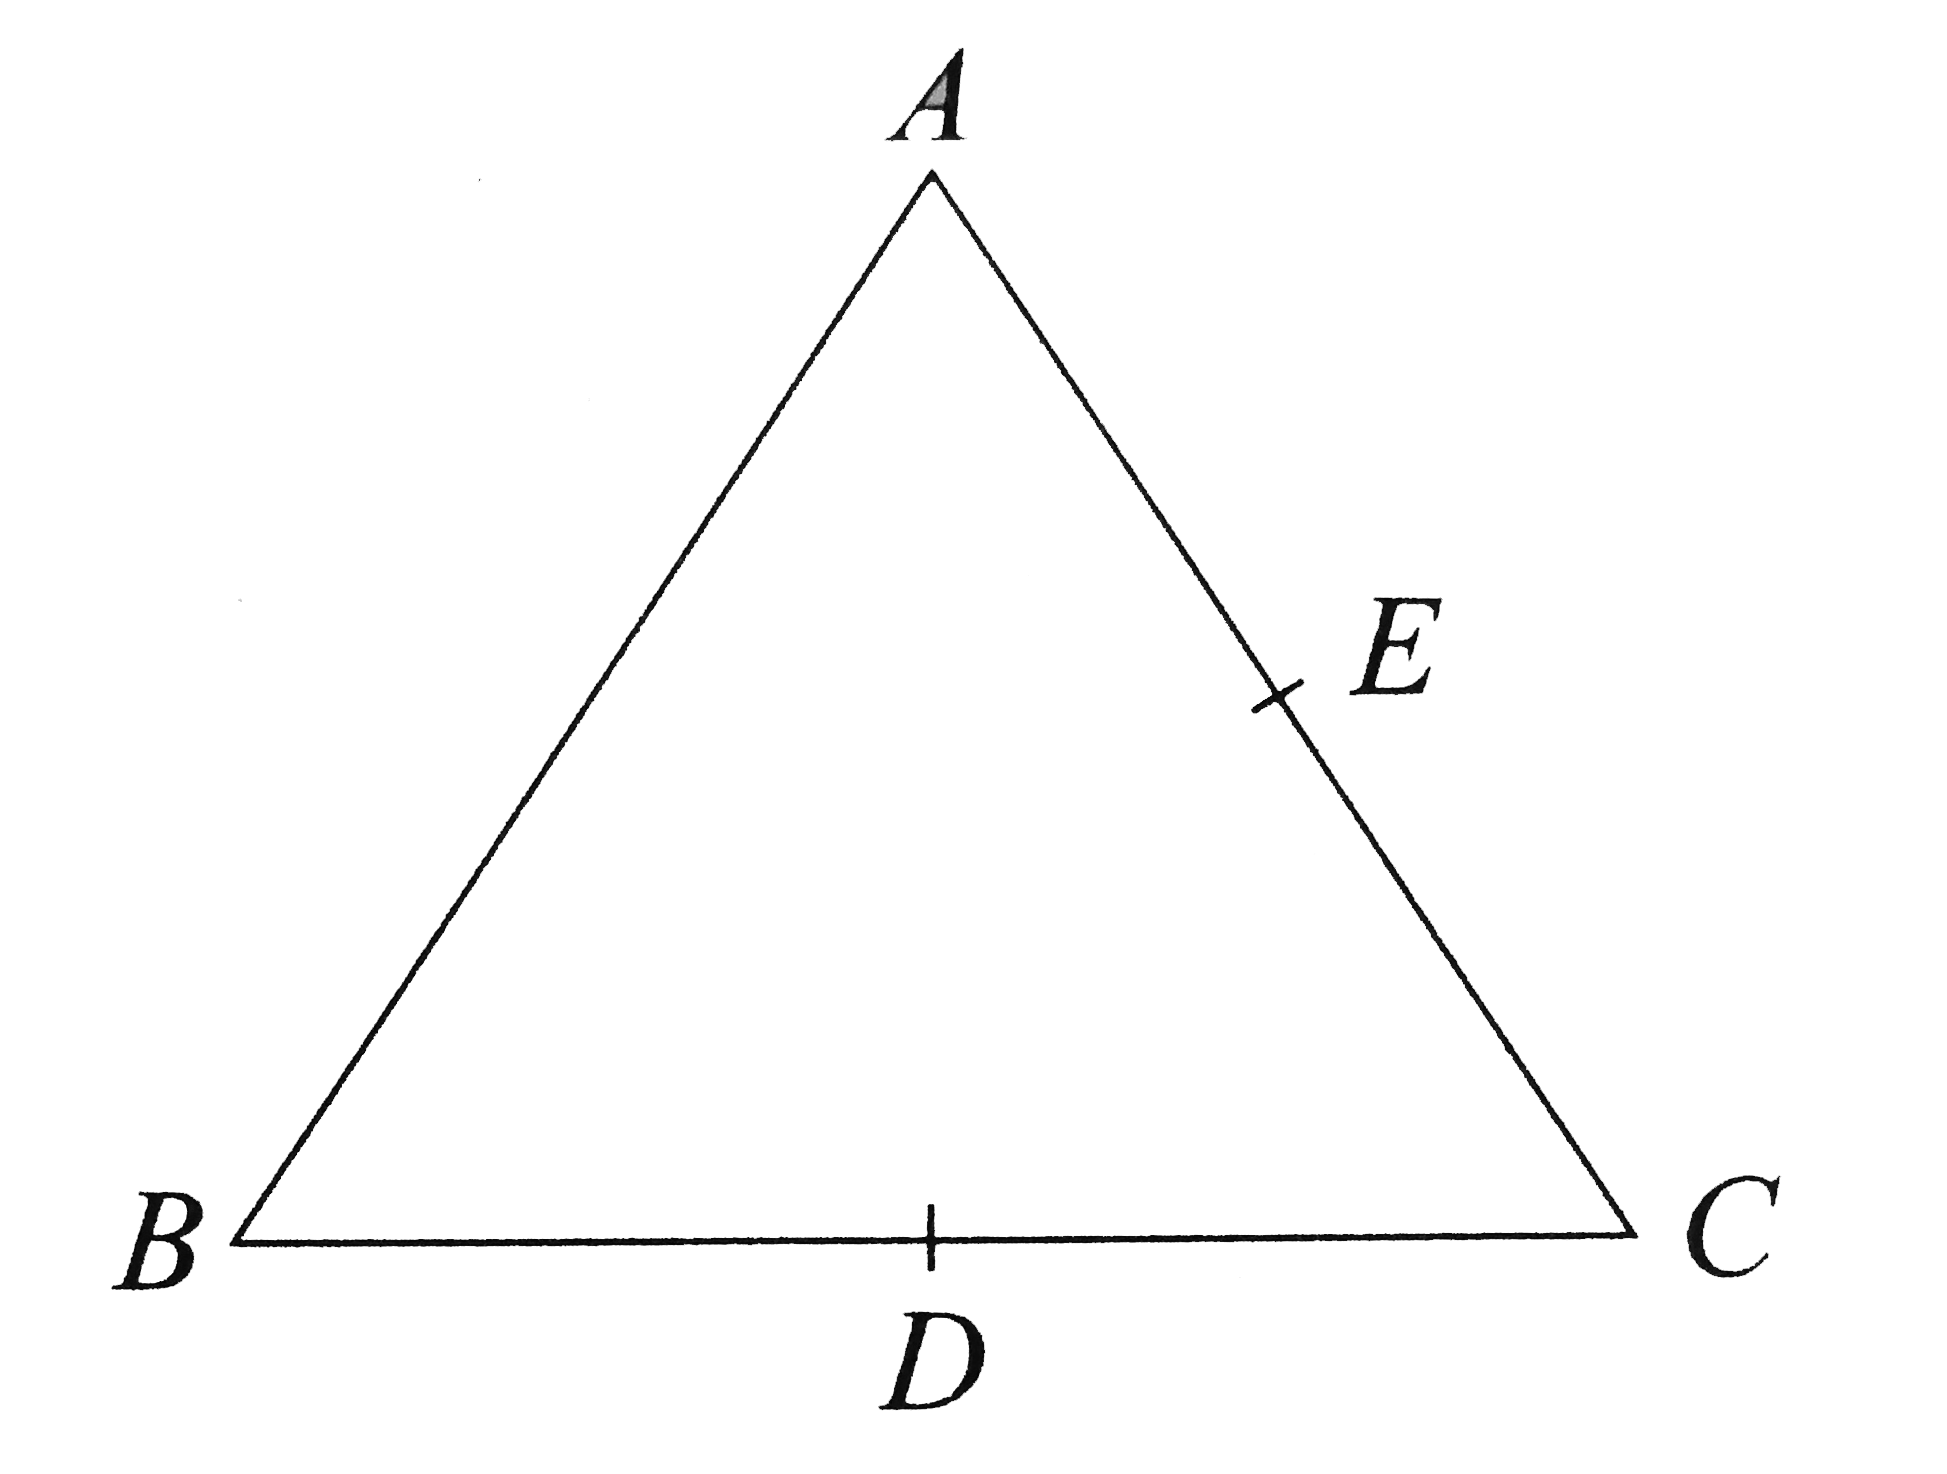 Three charges each+q, are placed at the corners of an isosceles triangle ABC of sides BC and AC, 2a, D and E are the mid-points of BC and CA. The work done in taking a charge Q from D to E is